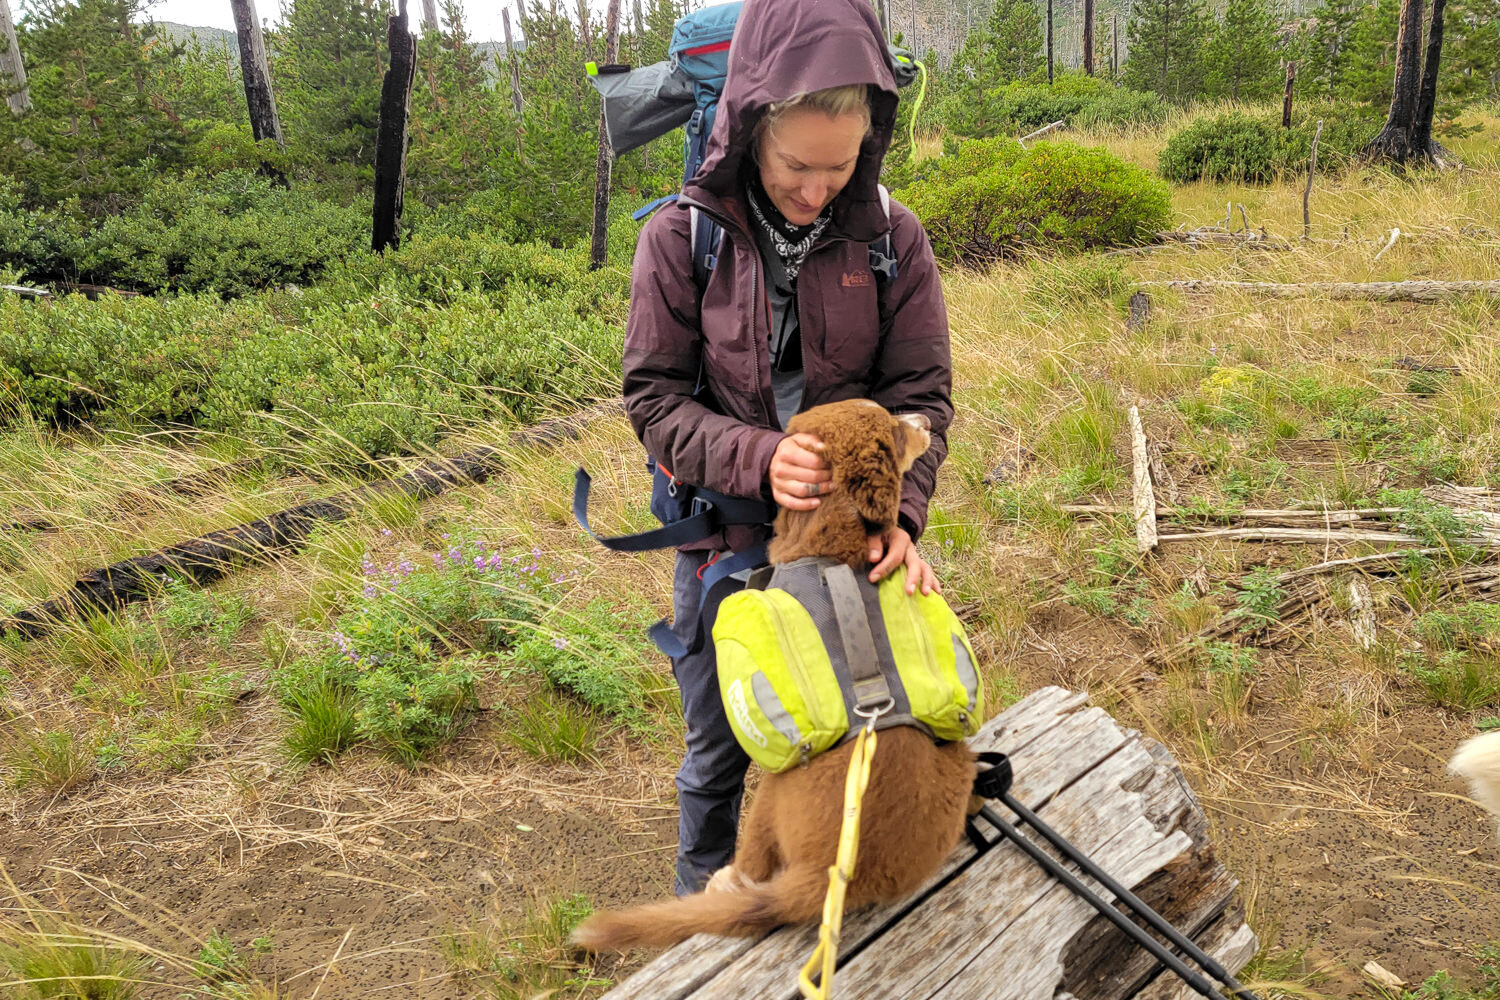 Give your dog lots of encouragement on backpacking trips so they can build confidence